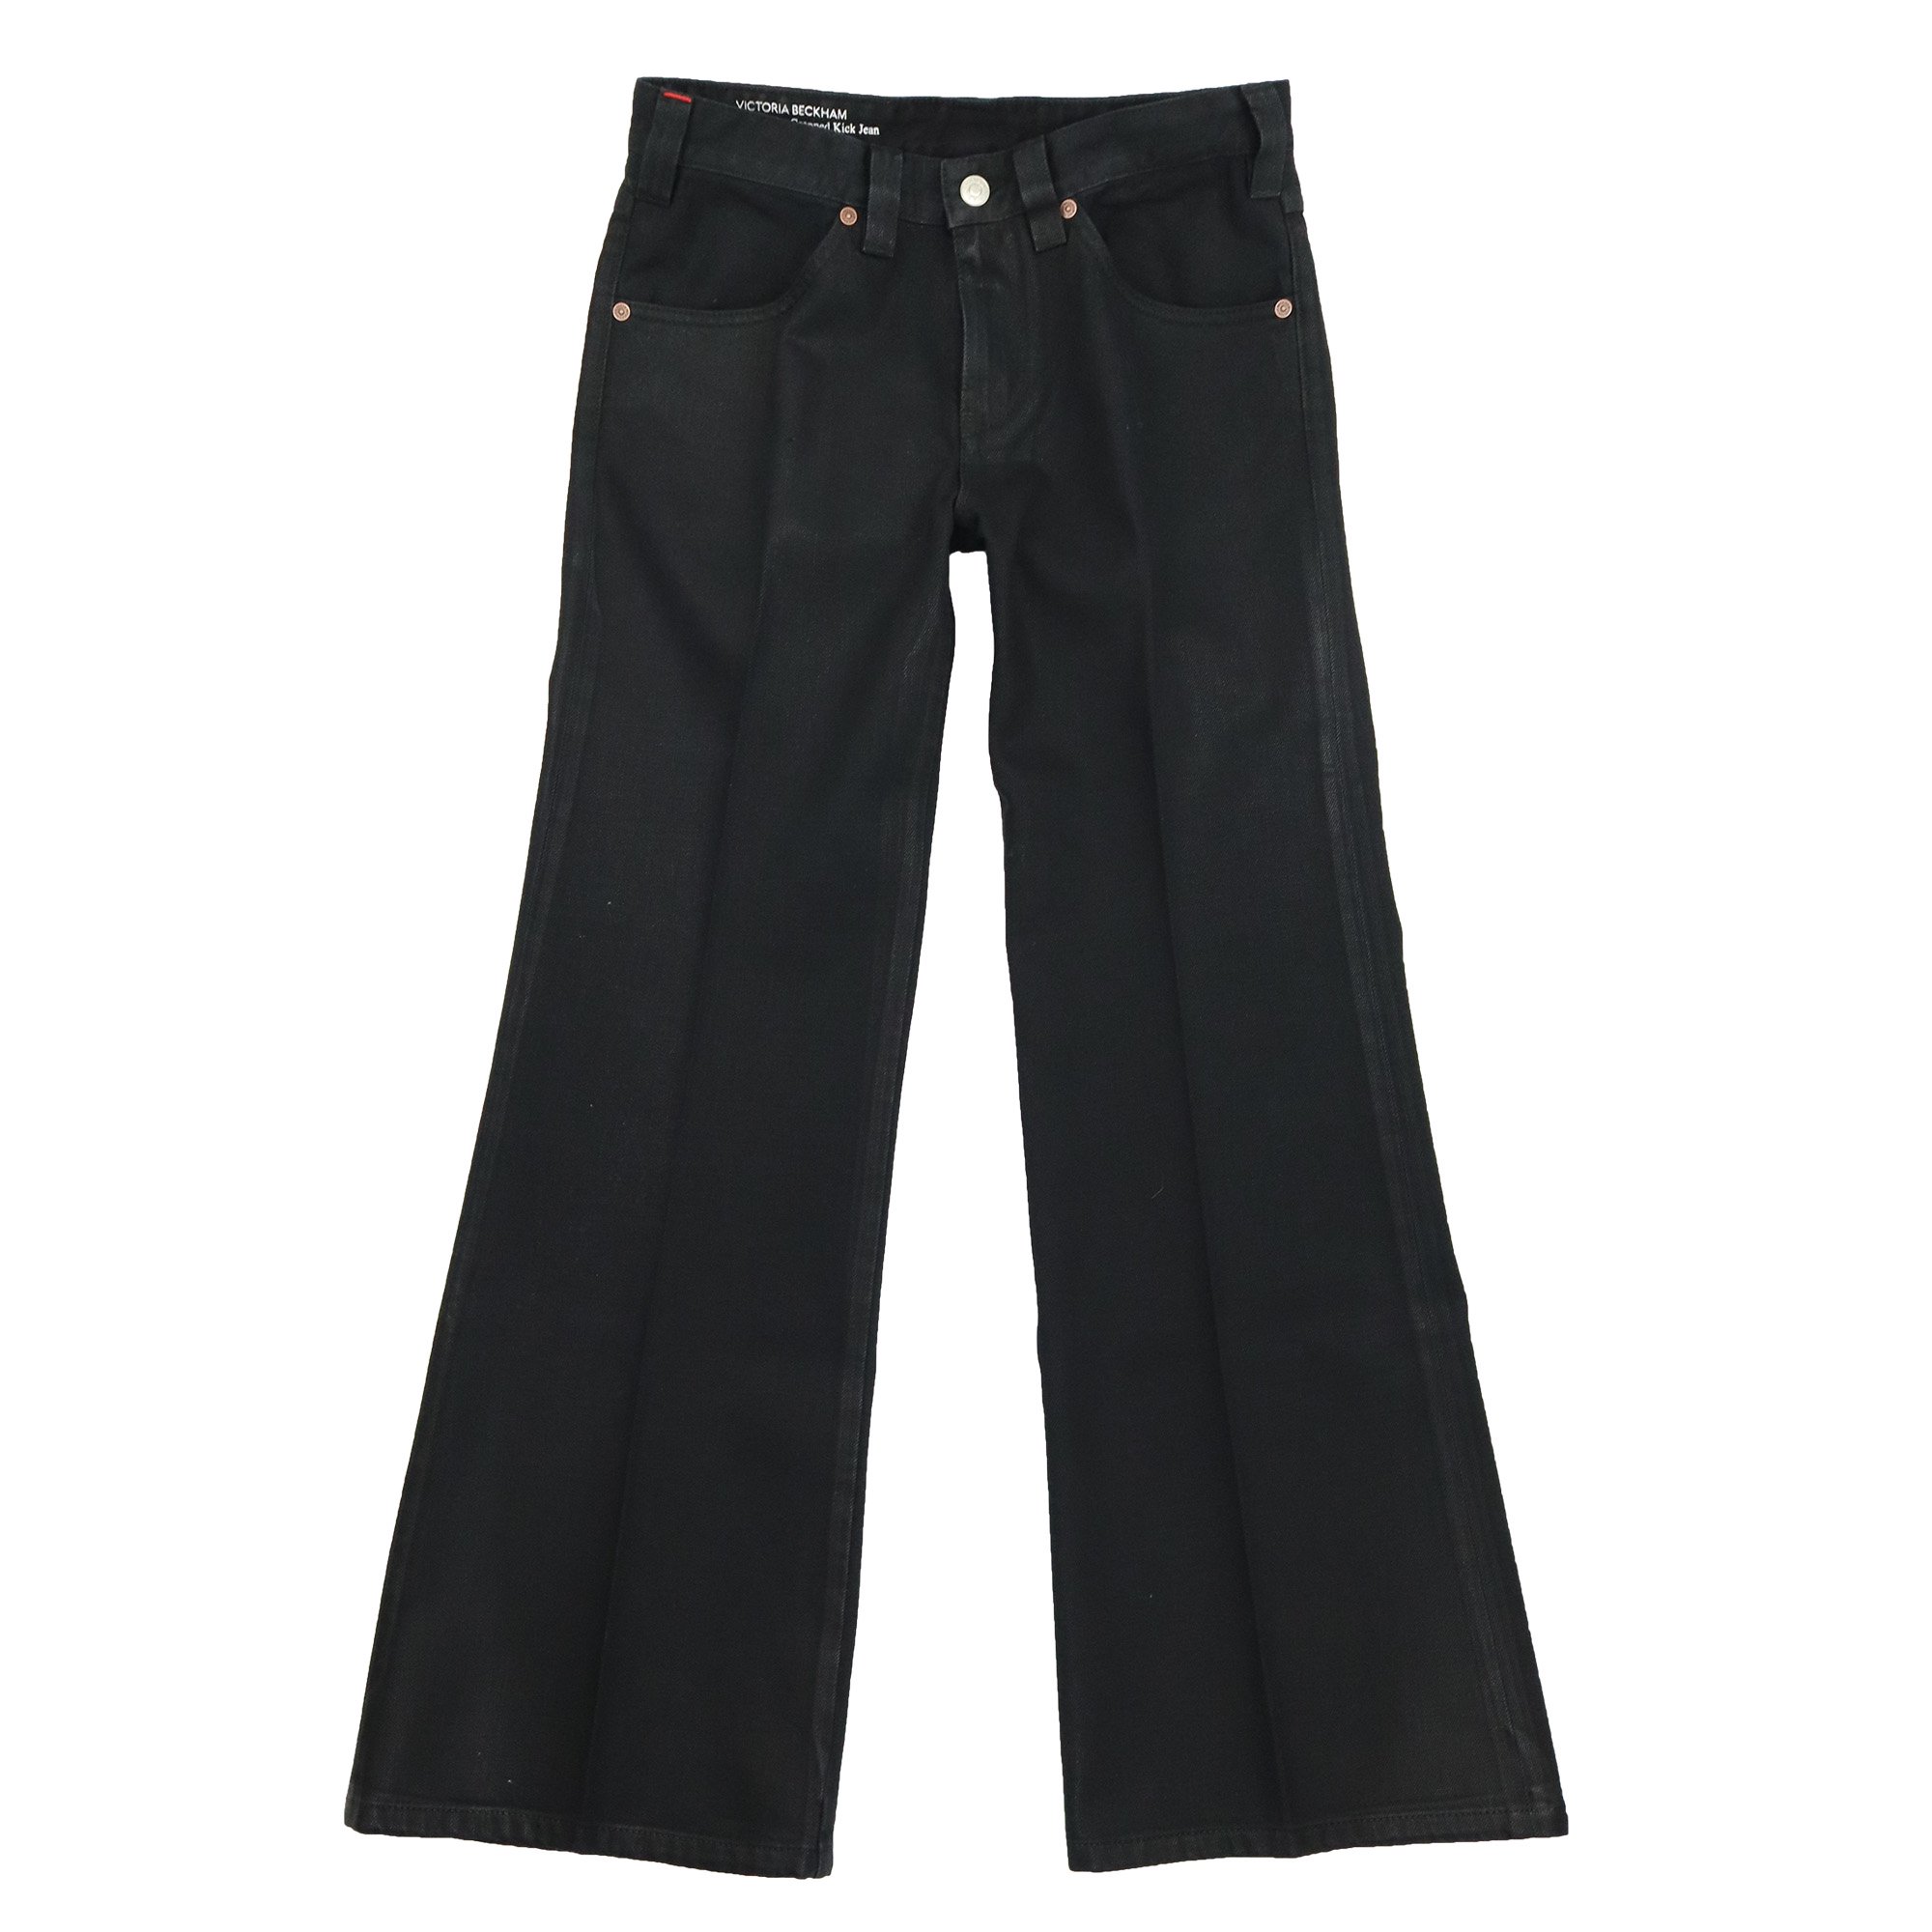 <img class='new_mark_img1' src='https://img.shop-pro.jp/img/new/icons21.gif' style='border:none;display:inline;margin:0px;padding:0px;width:auto;' />30%OFFVICTORIA BECKHAM Flare denim pants BLACK